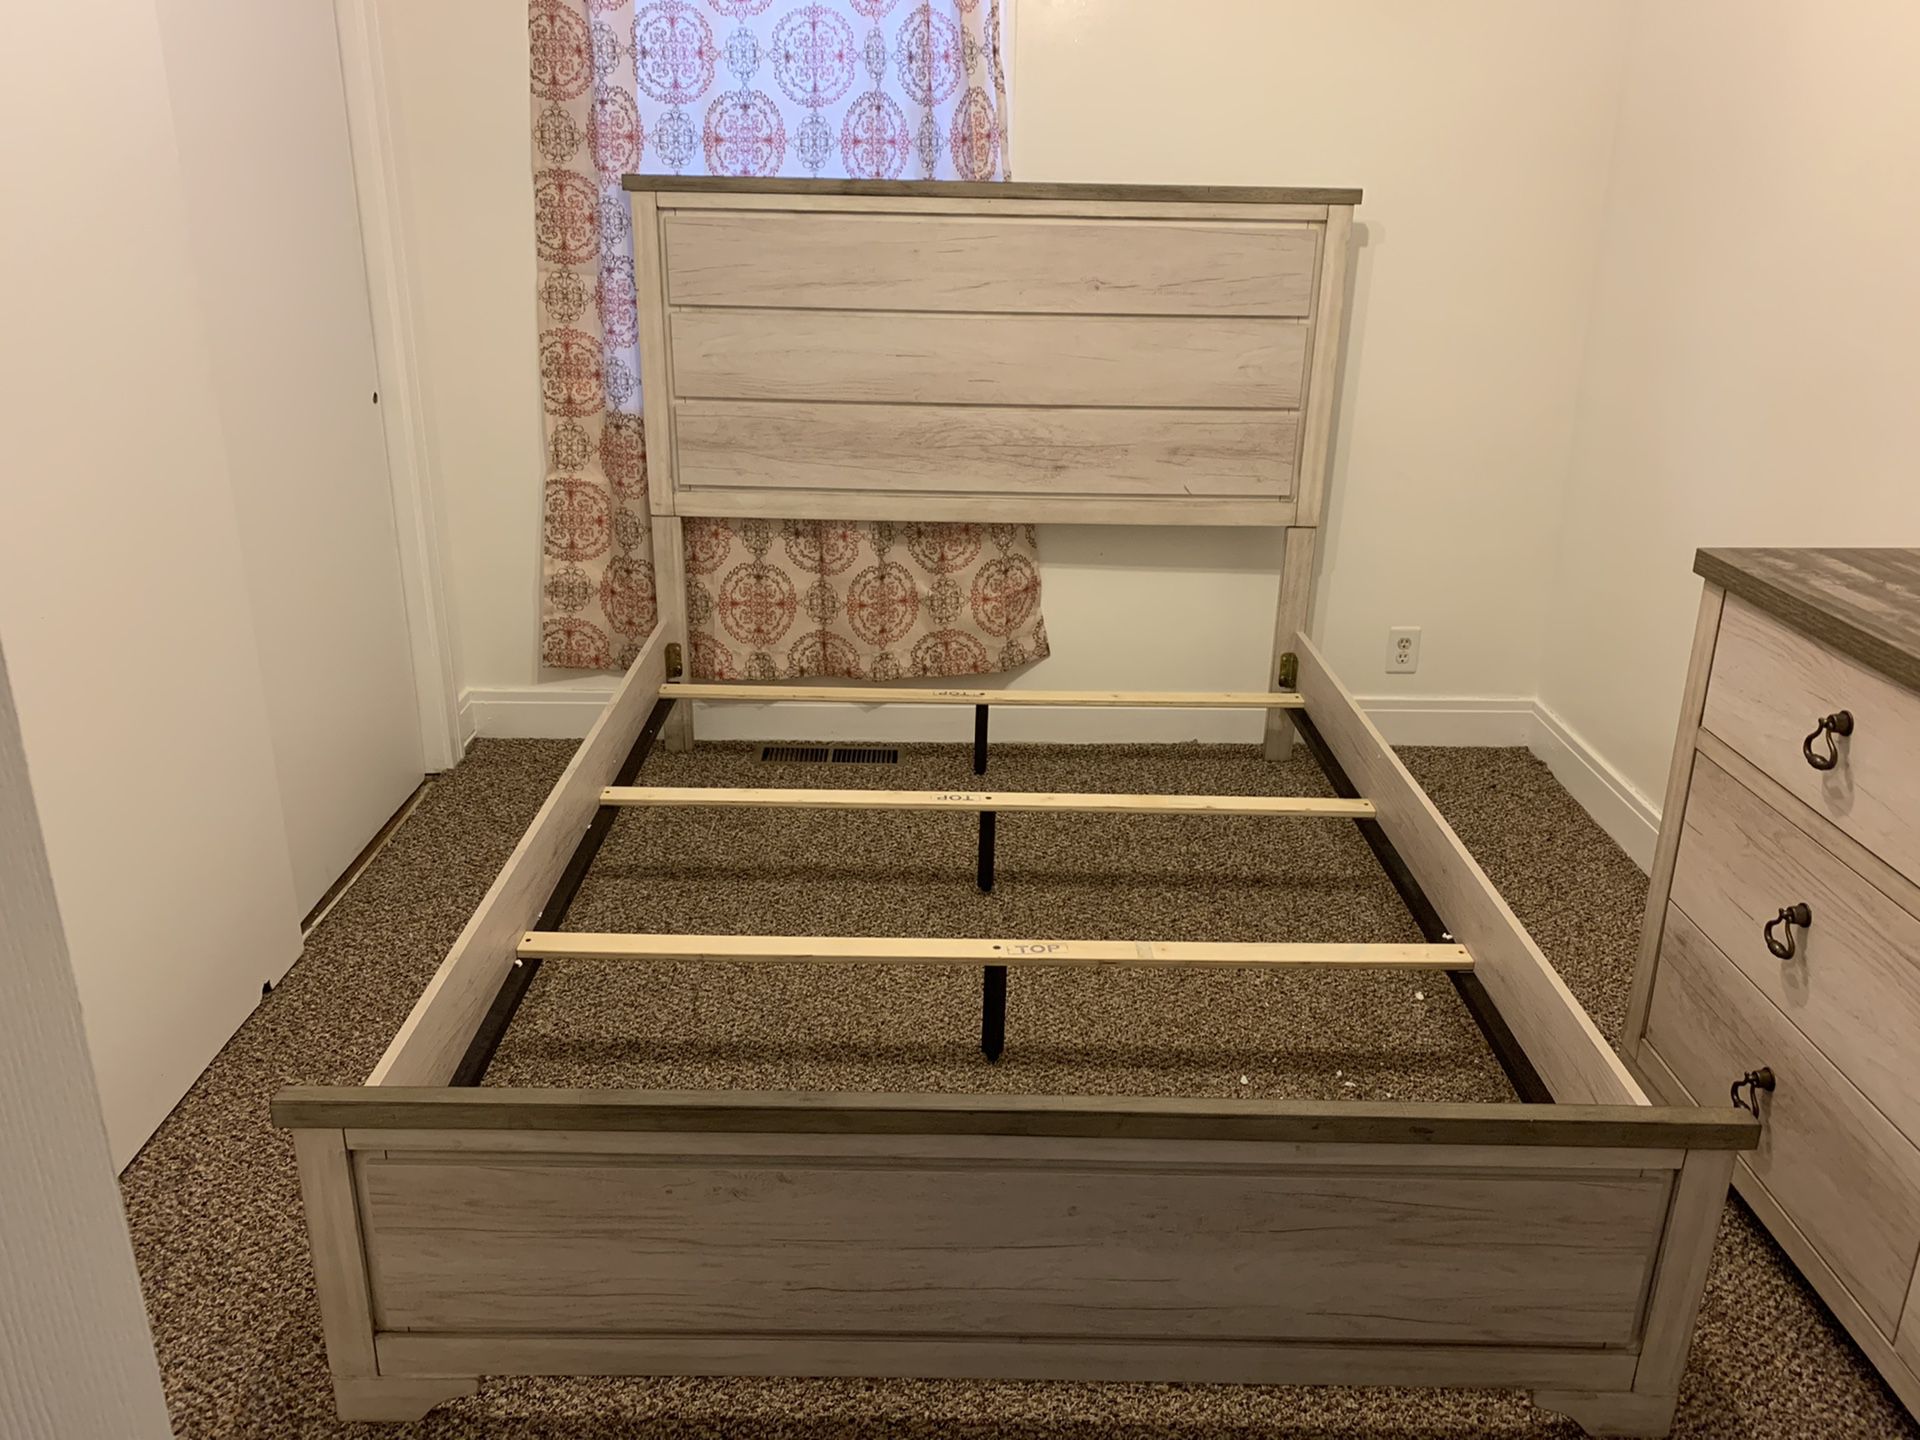 Queen size frame and dresser